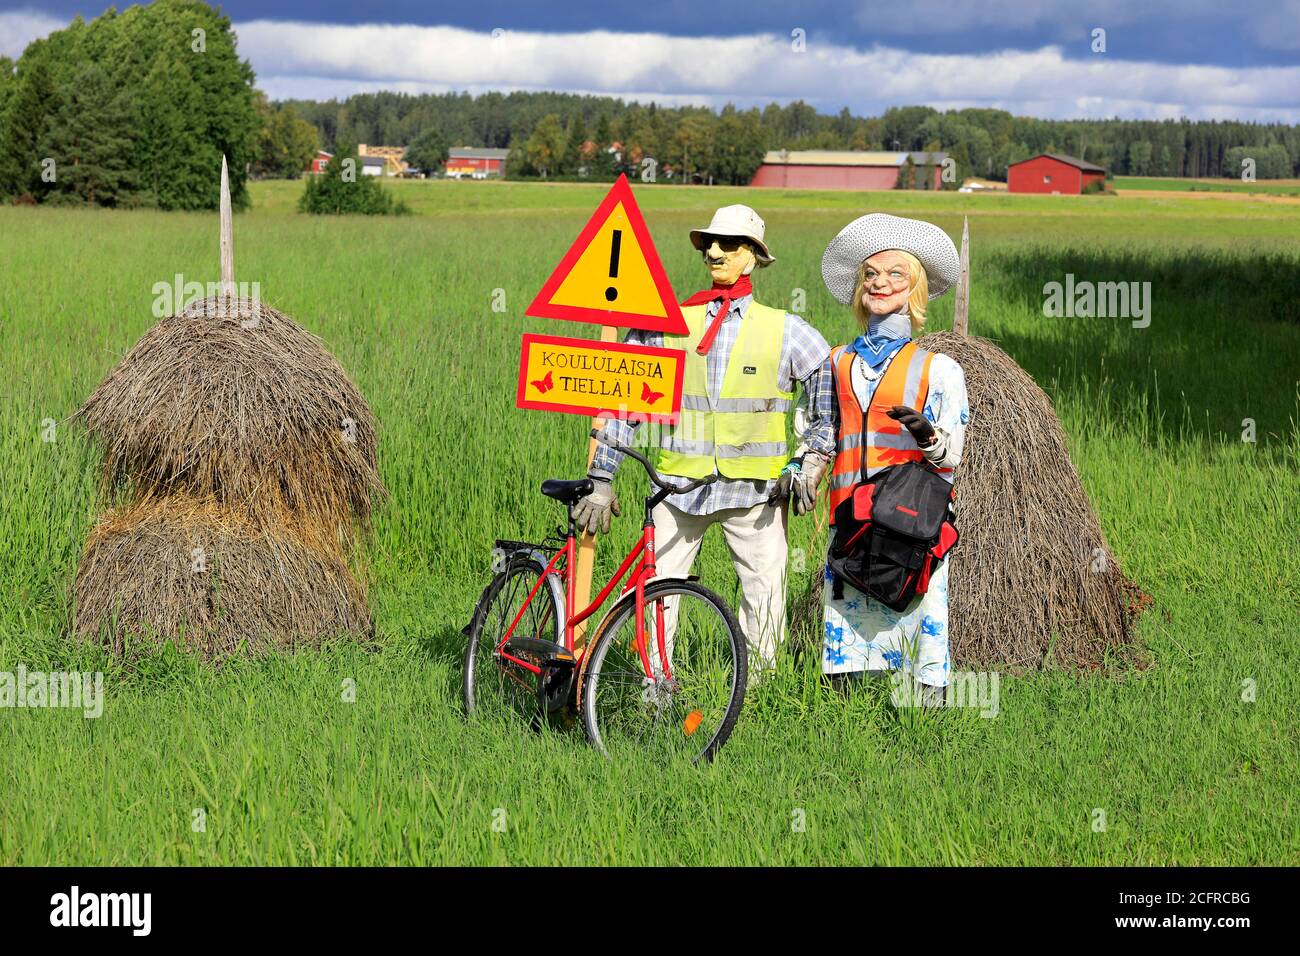 Funny arrangement of an couple with safety vests on alerts motorists of the Hiiden koulu school ahead. Pertteli, Salo, Finland. September 6, 2020. Stock Photo